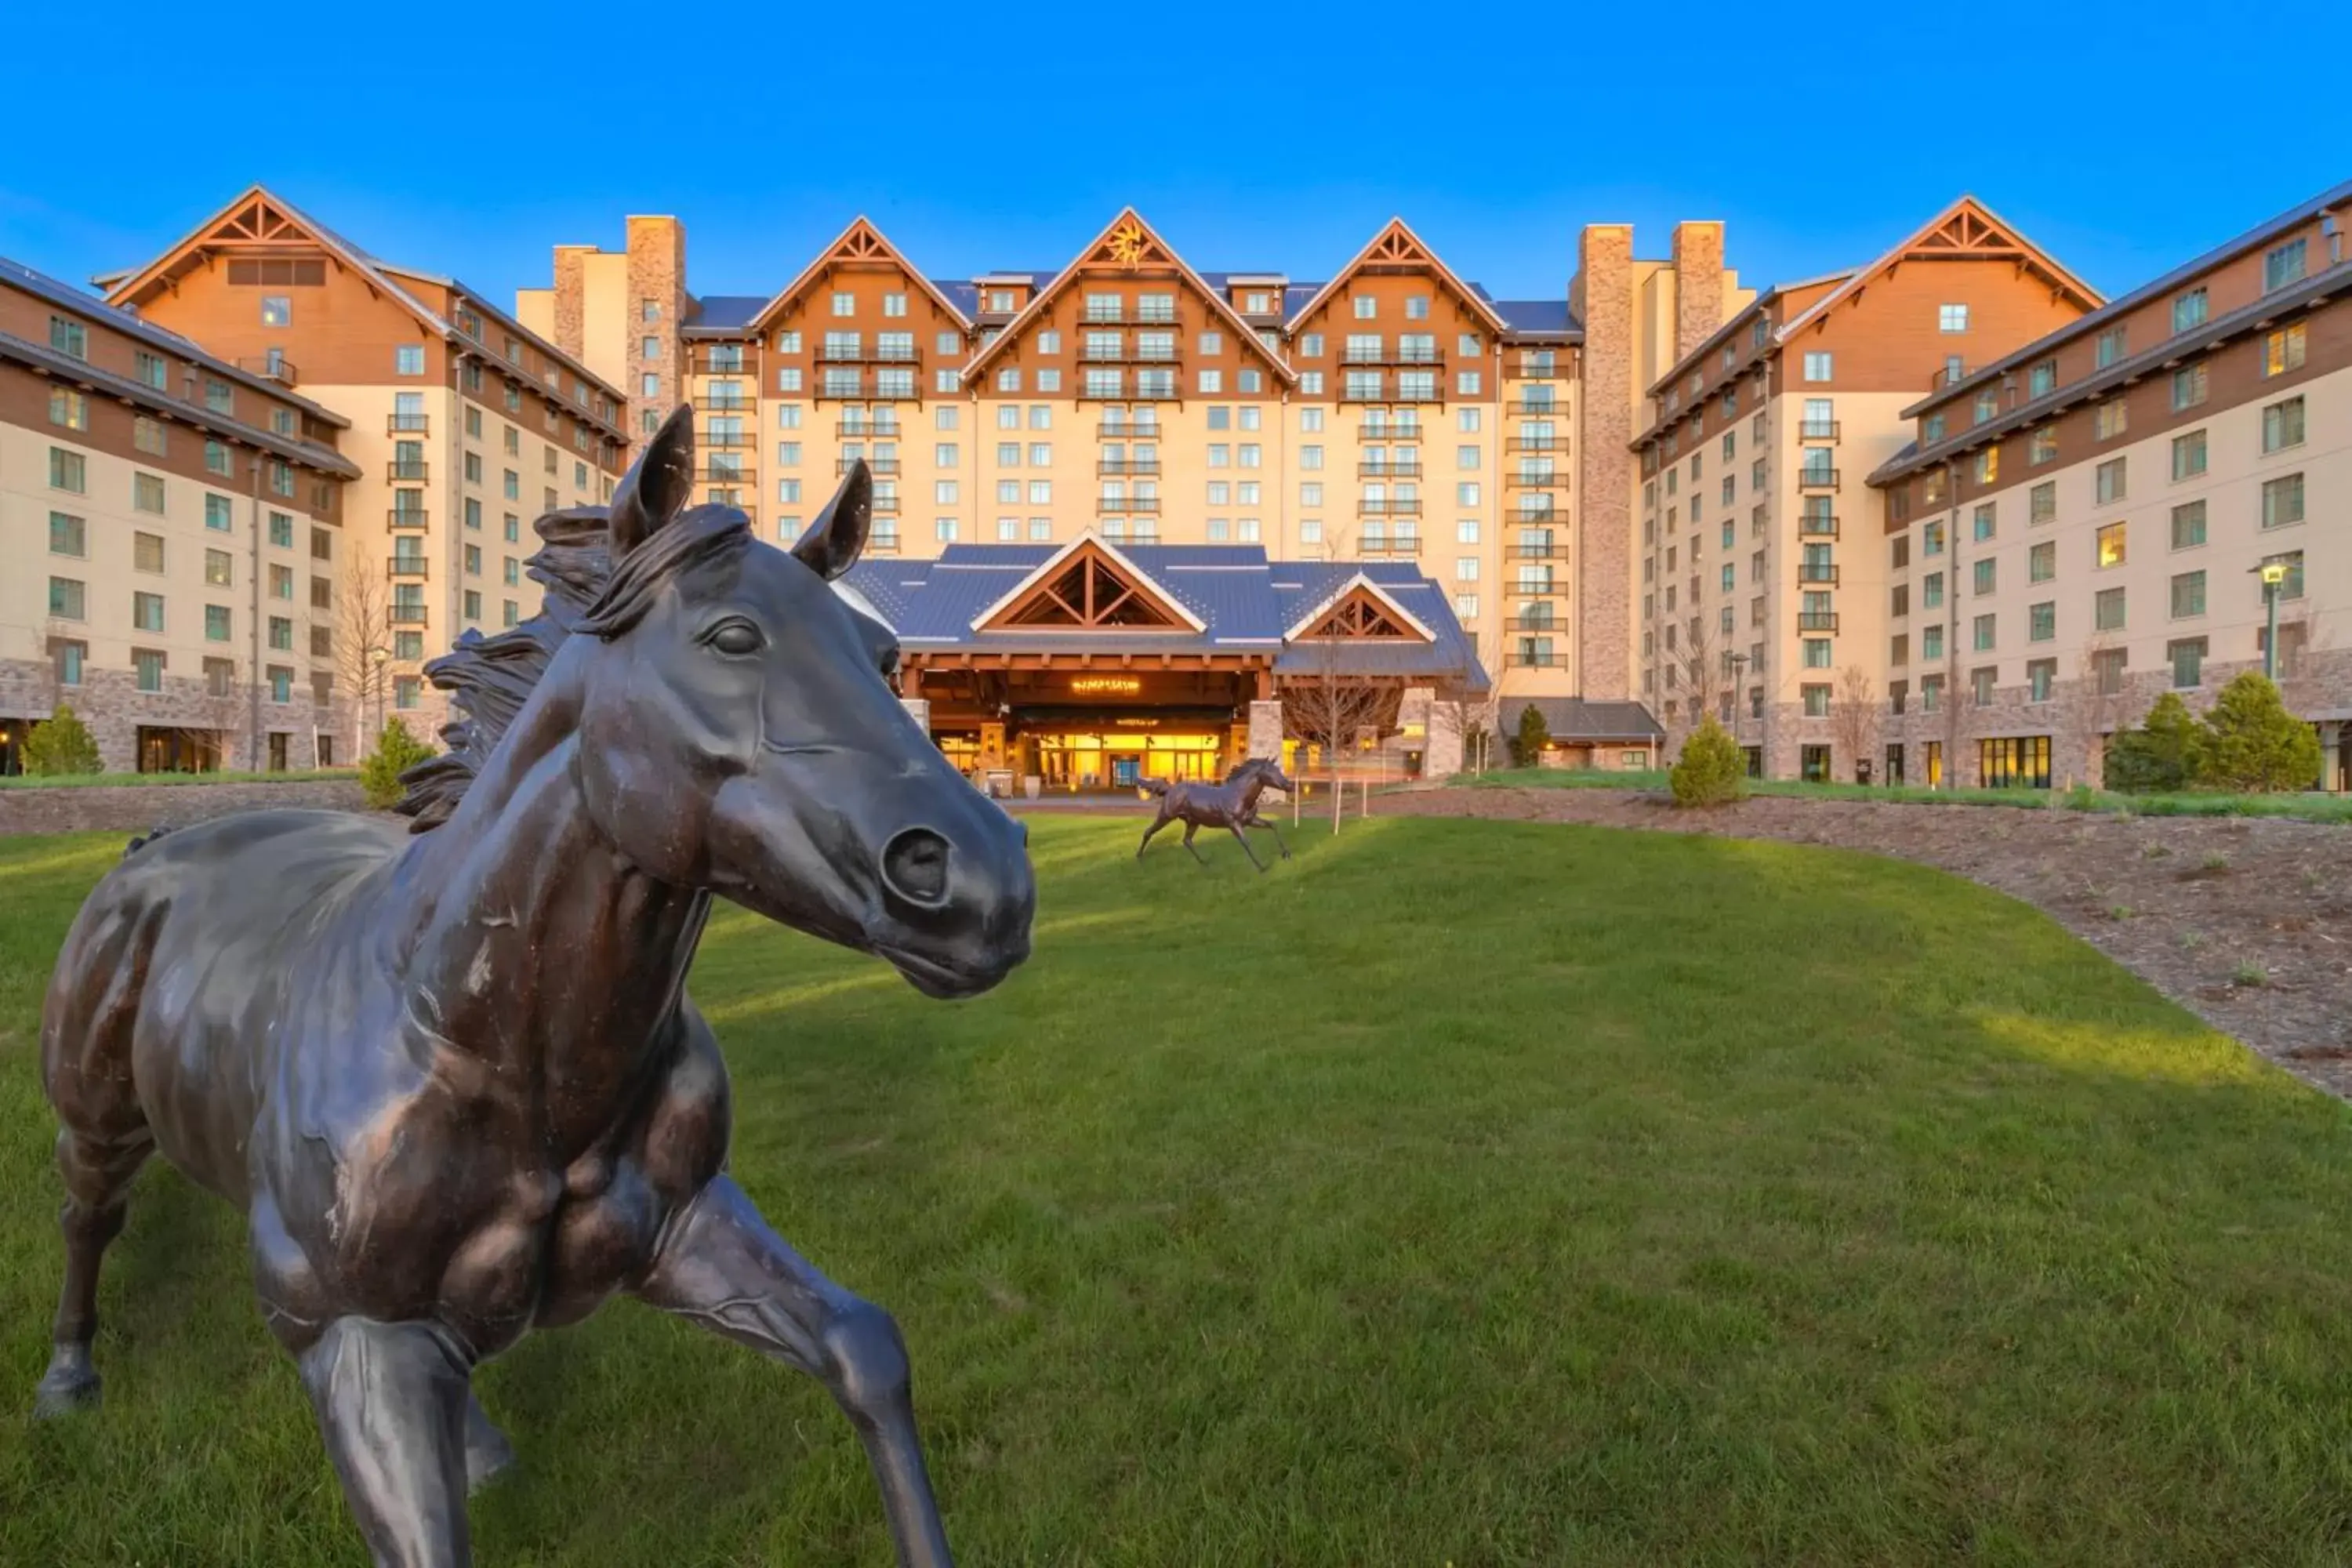 Property building, Other Animals in Gaylord Rockies Resort & Convention Center